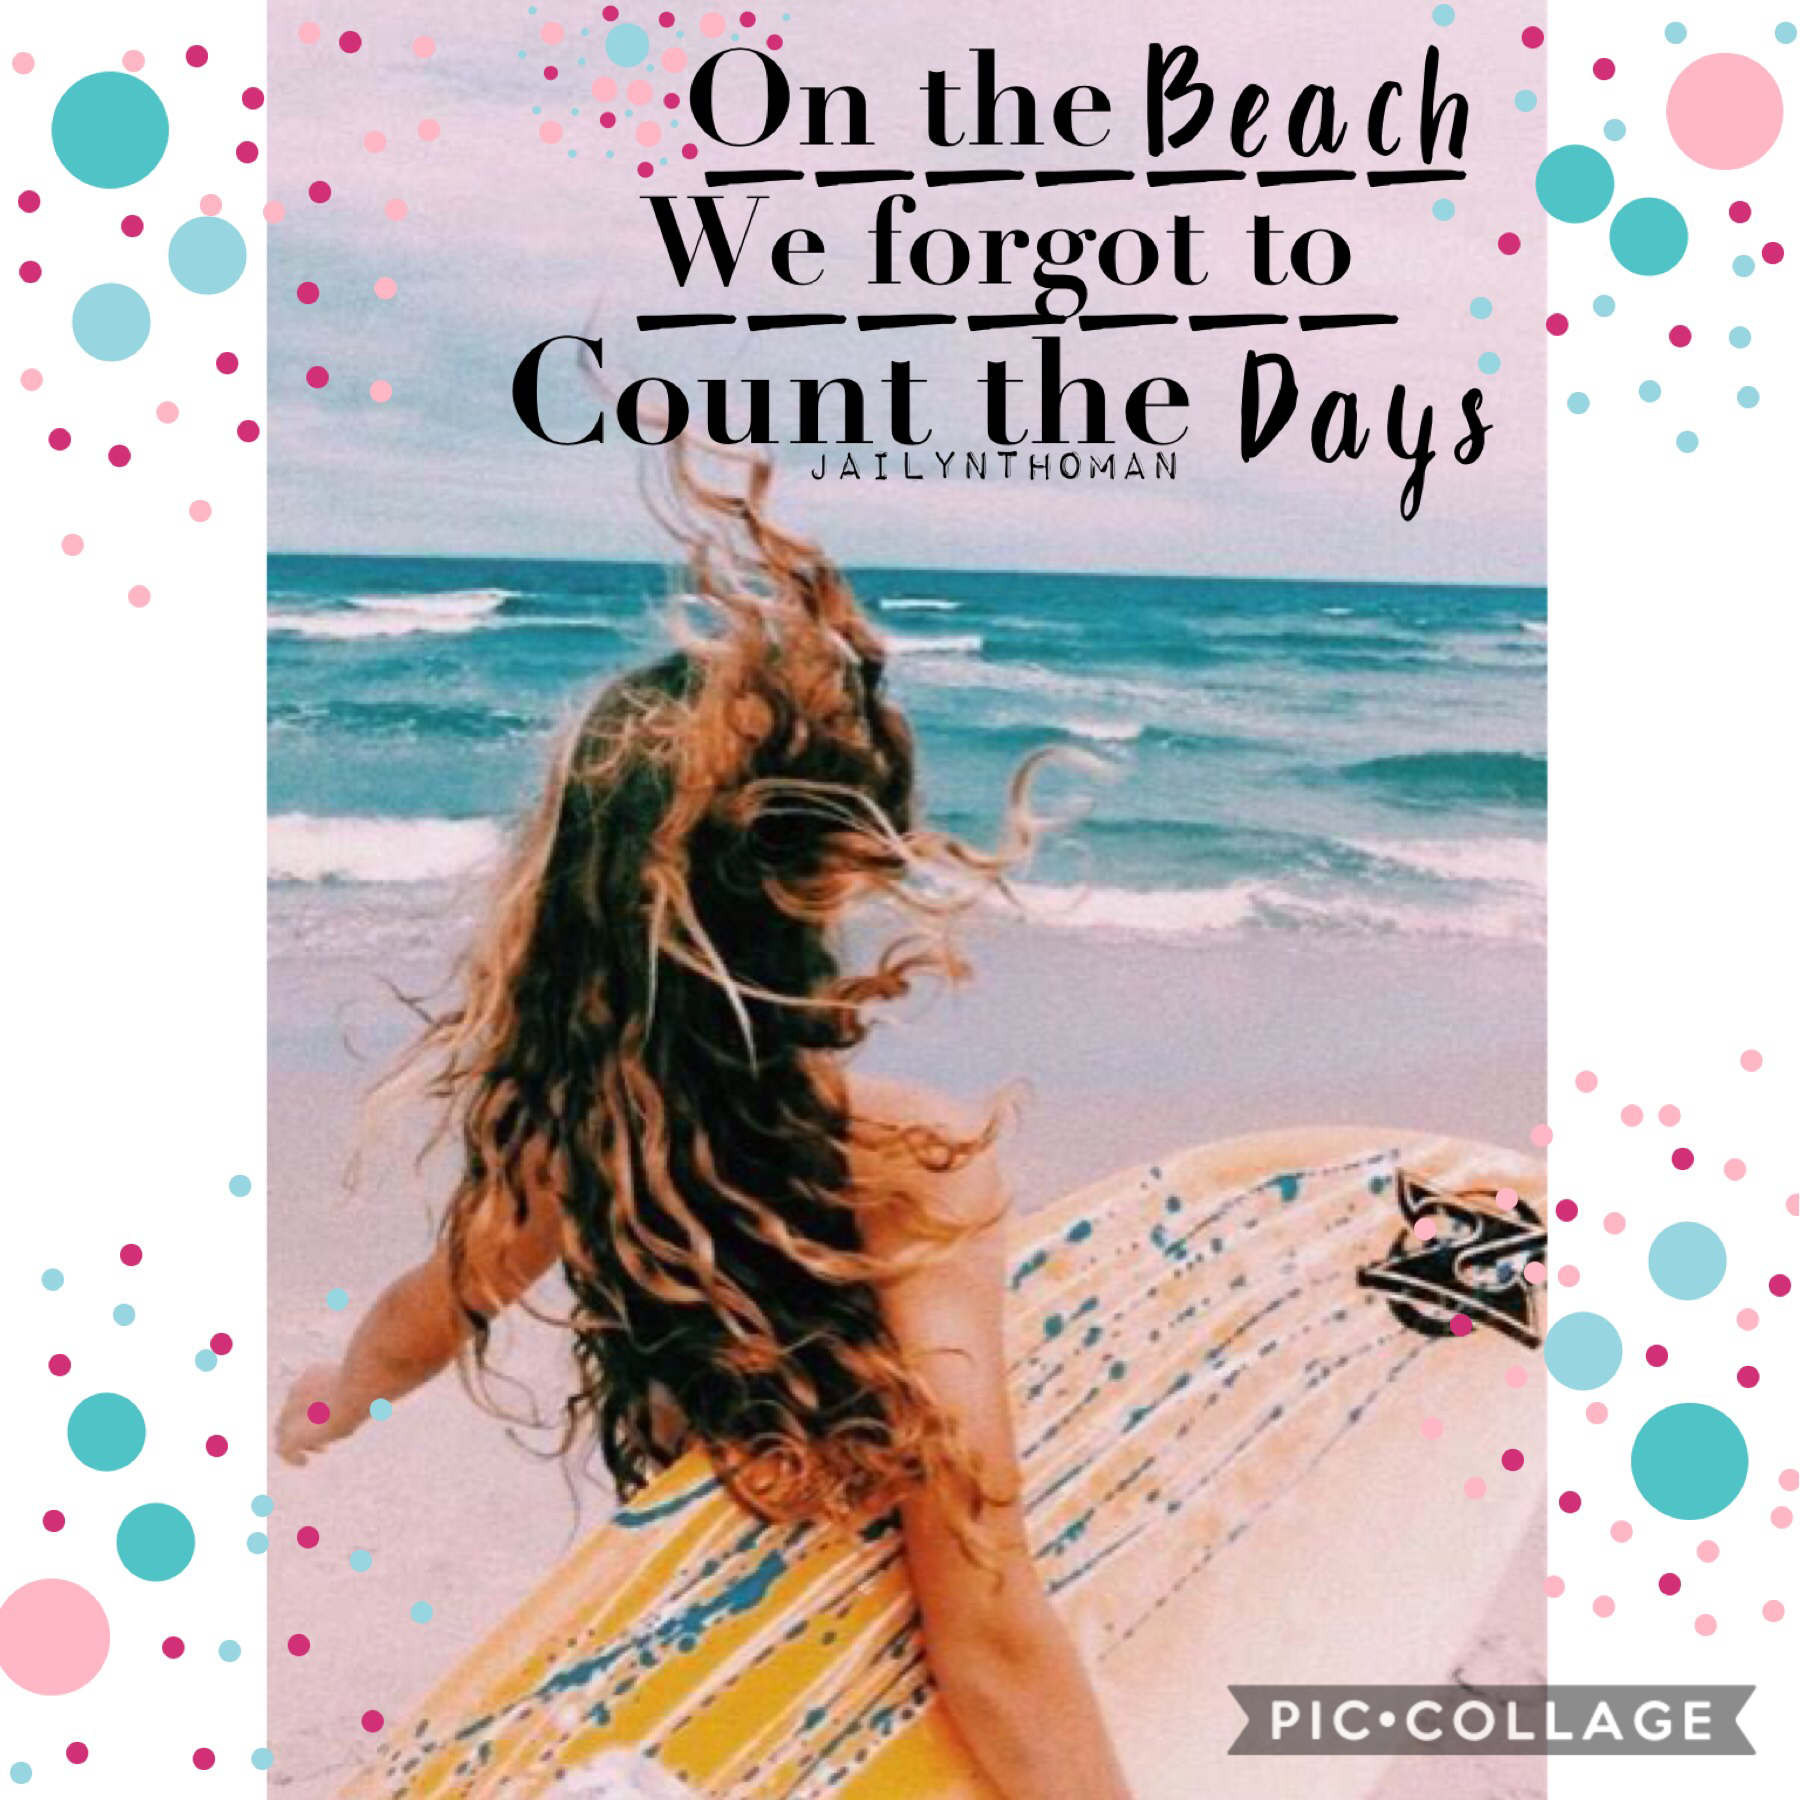 🦋(5/4/21)🦋
I know this isn’t turtle themed but it is also beach themed so why not! Do you have any good beach user name ideas? Sorry for not being active I have been so busy! 
Qotd: any beach user name ideas?💞💞💞